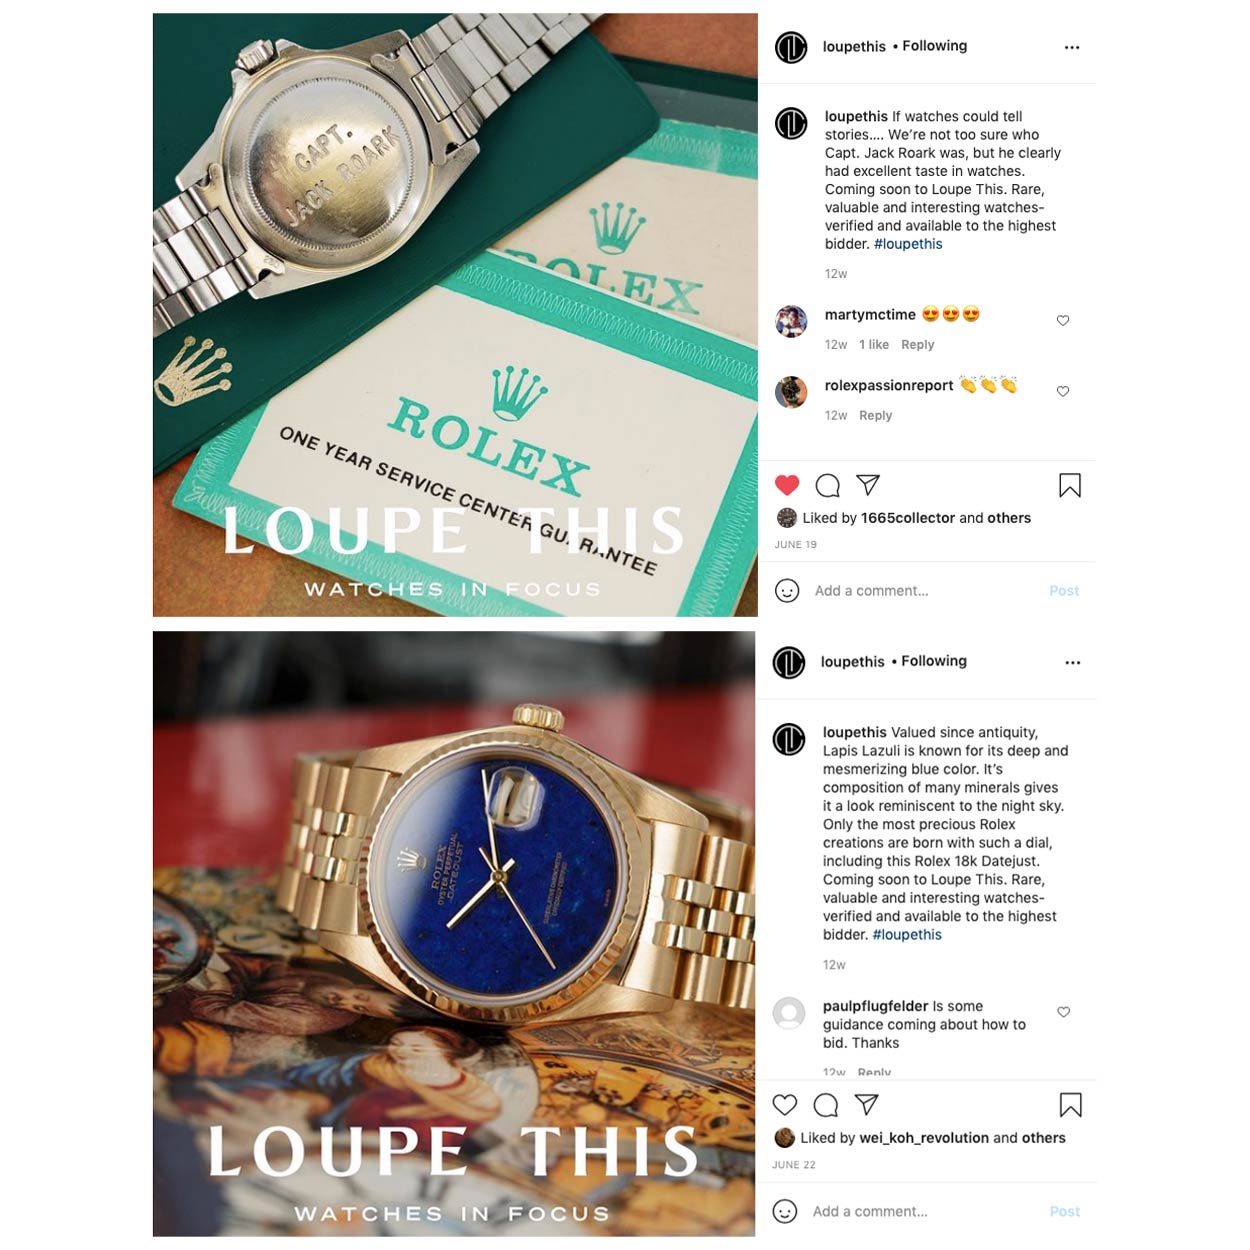 Loupe This was conceptualised with the idea of engaging the watch community in a new and interesting way.